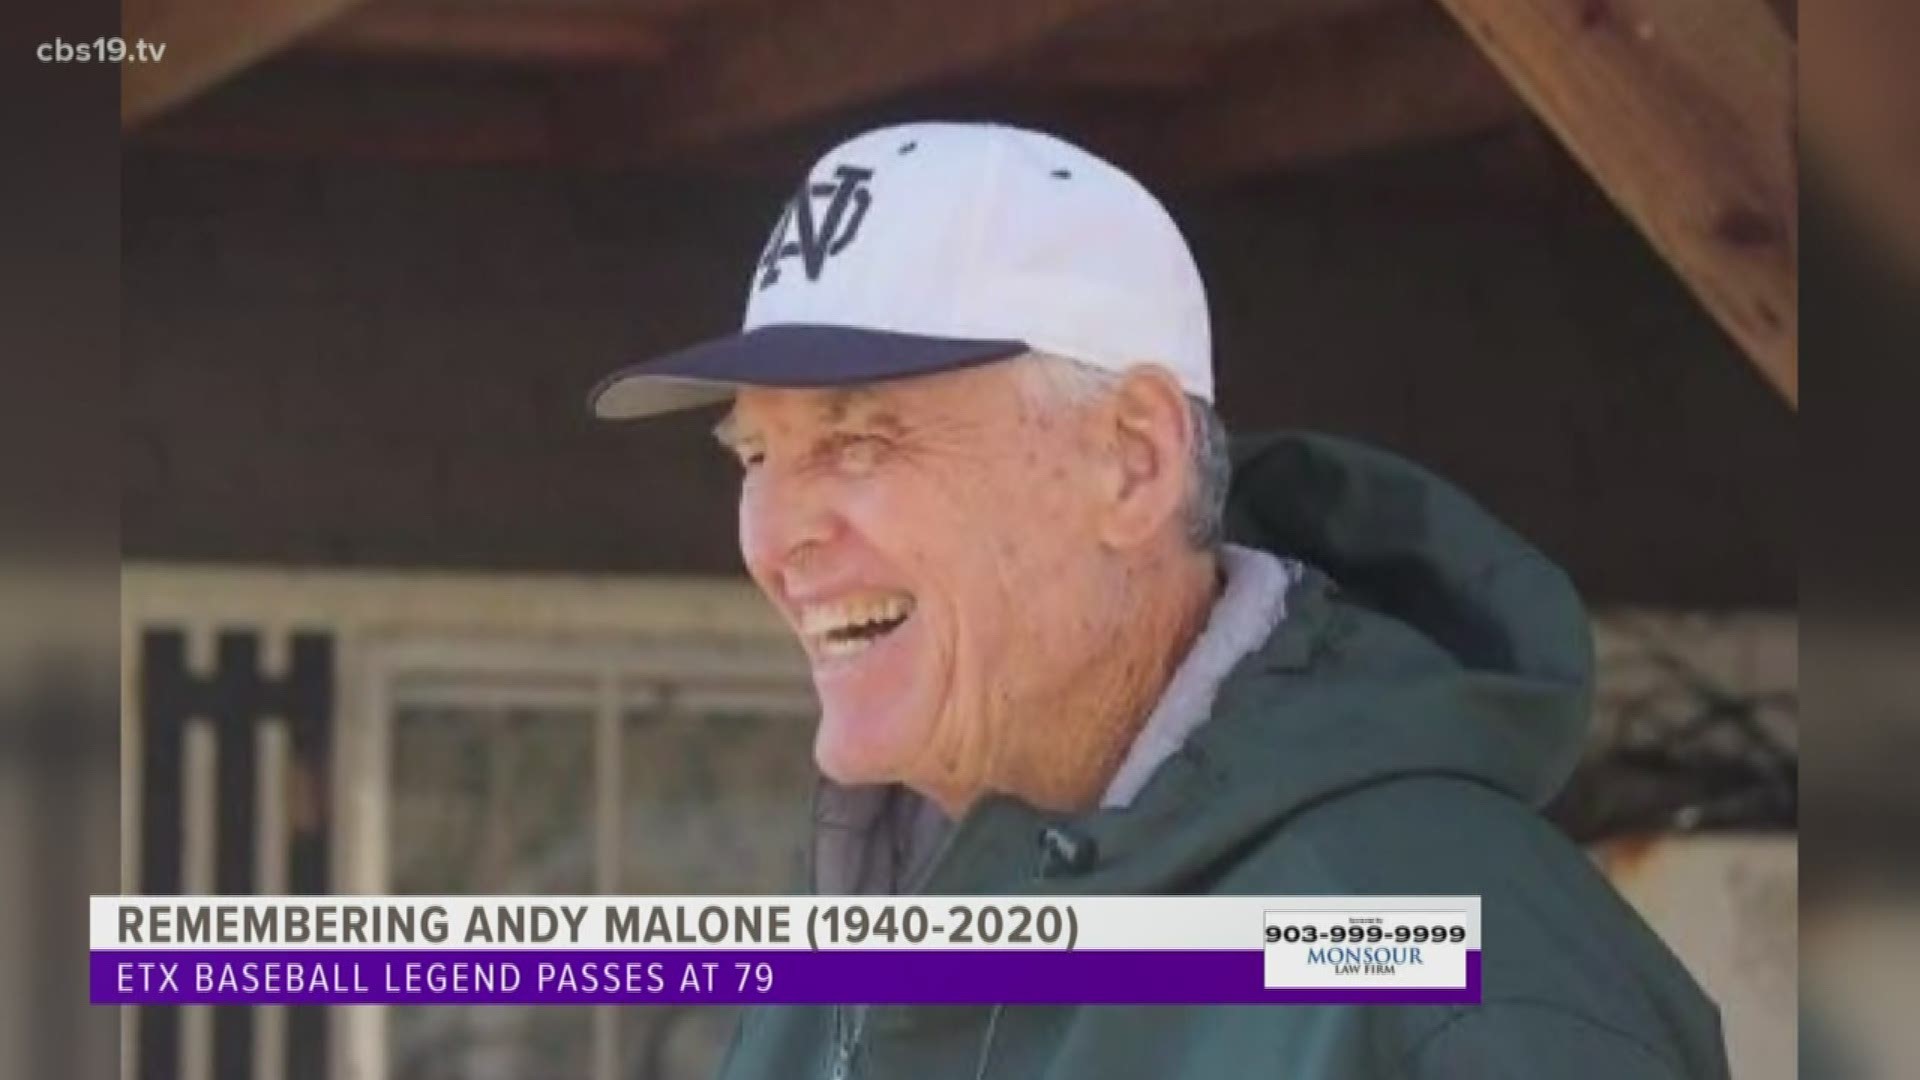 Longview native, Scott Malone, joined CBS 19 Sports' Tina Nguyen to discuss his father's legacy and impact in East Texas high school baseball.